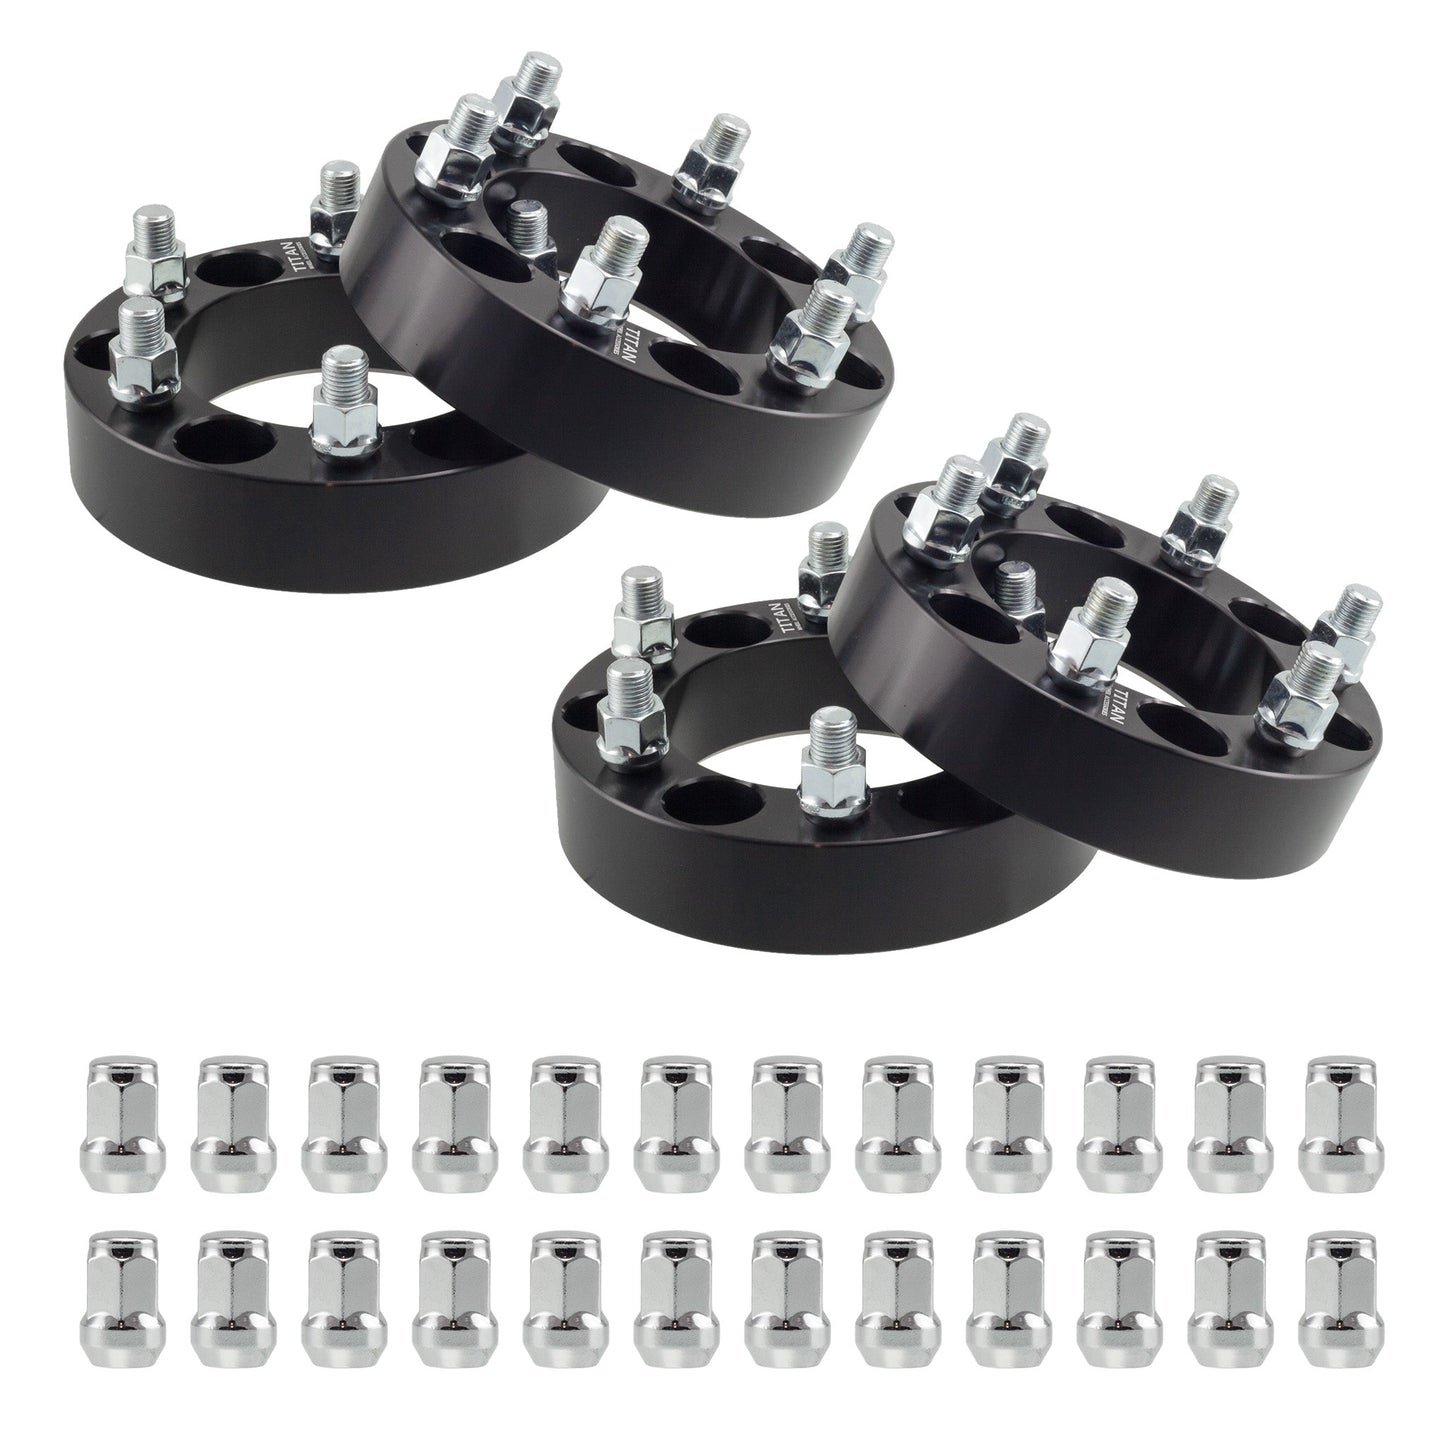 2" (50mm) Titan Wheel Spacers for Ford F150 2015+ | 6x135 | 87.1 Hubcentric |14x1.5 Studs | Titan Wheel Accessories